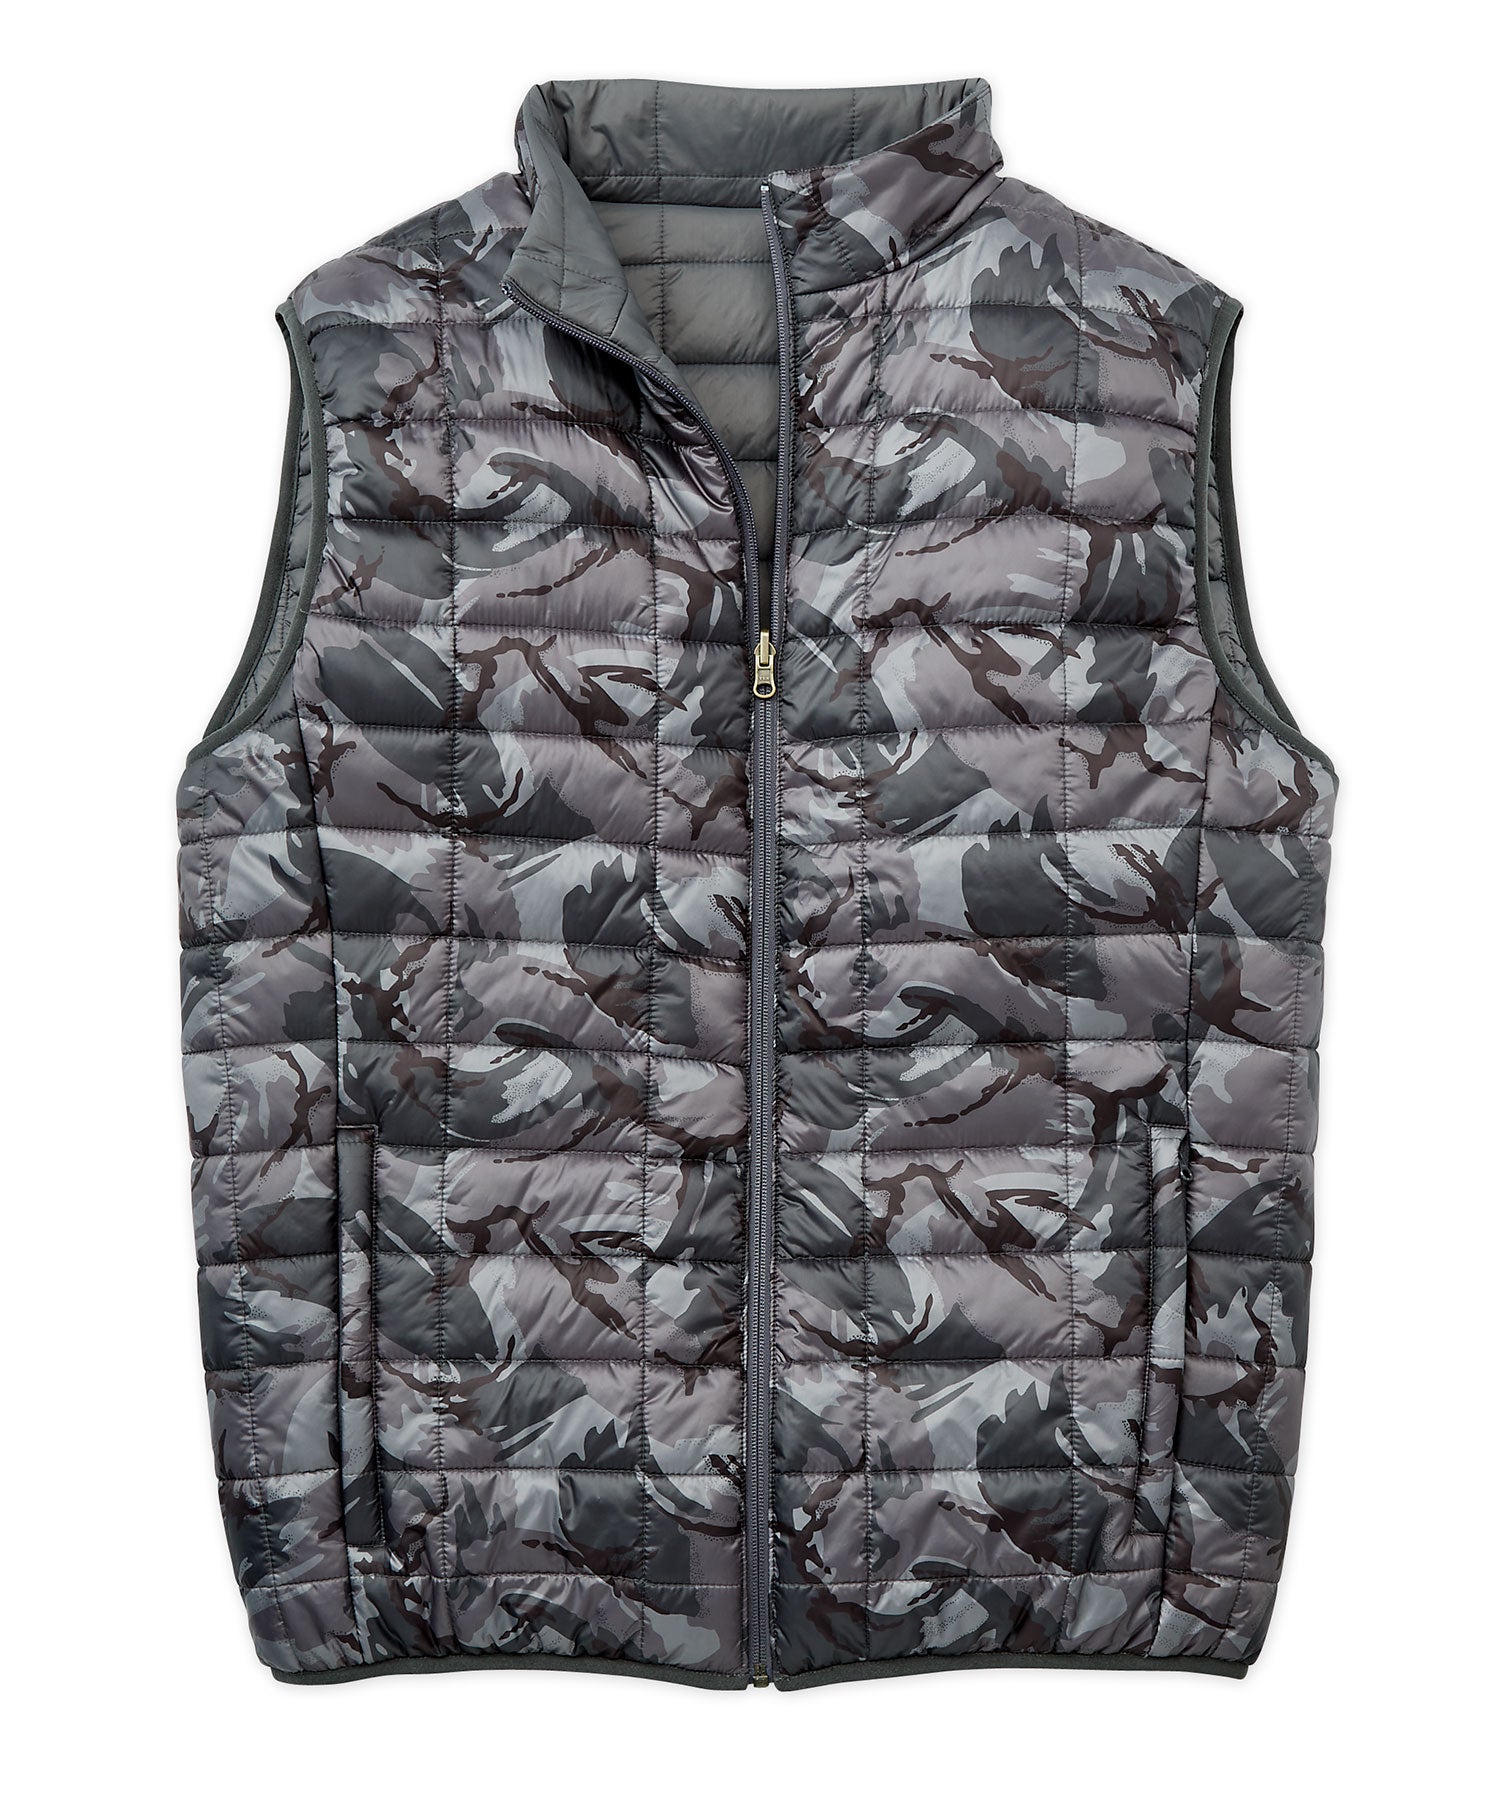 Outerwear Vests – Mr. Big & Tall